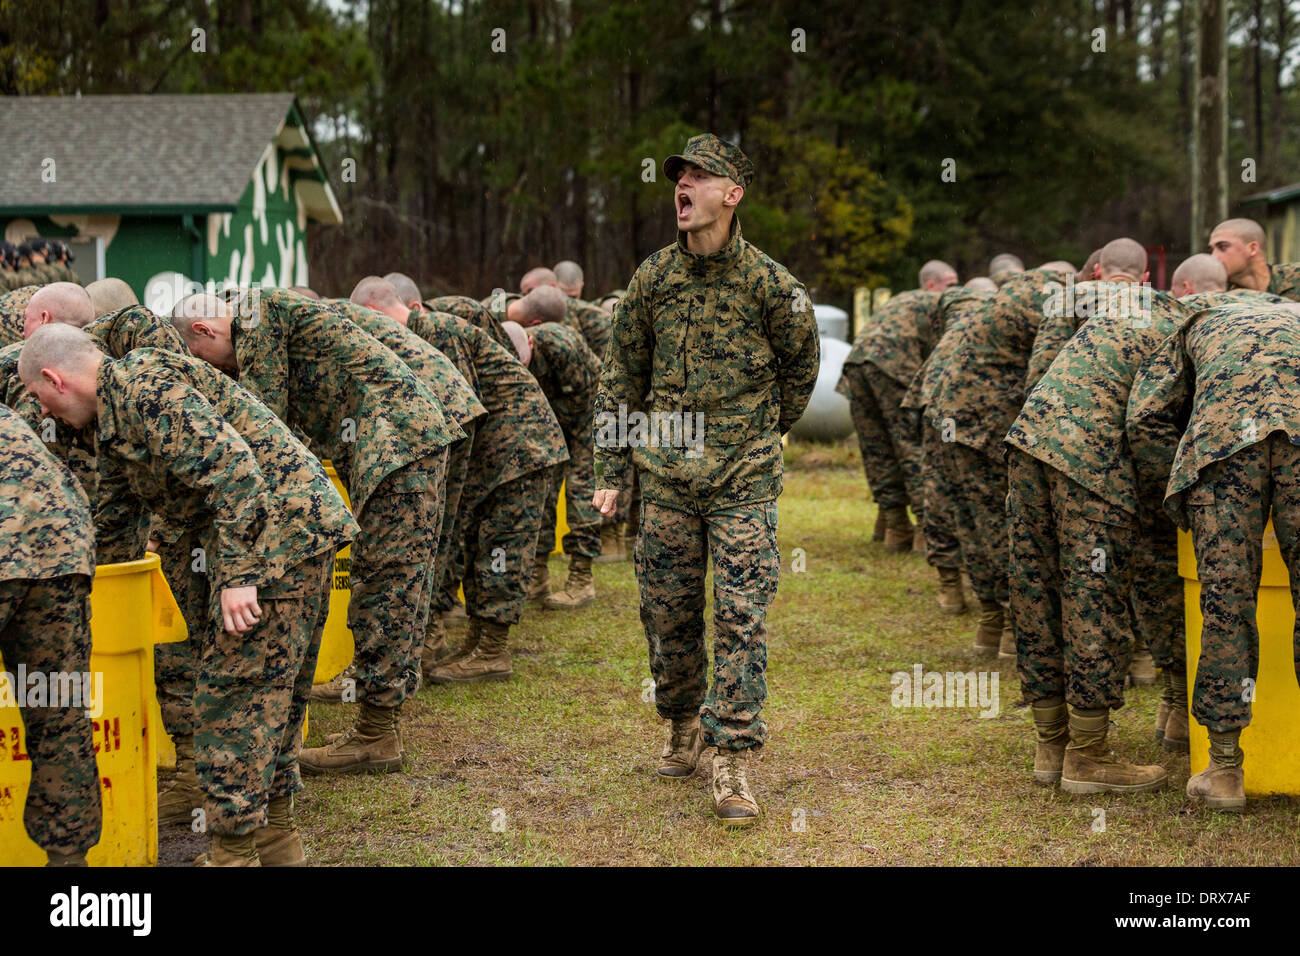 US Marine Corps drill instructor shouts instructions to recruits after exiting the gas chamber during boot camp January 13, 2014 in Parris Island, SC. Stock Photo